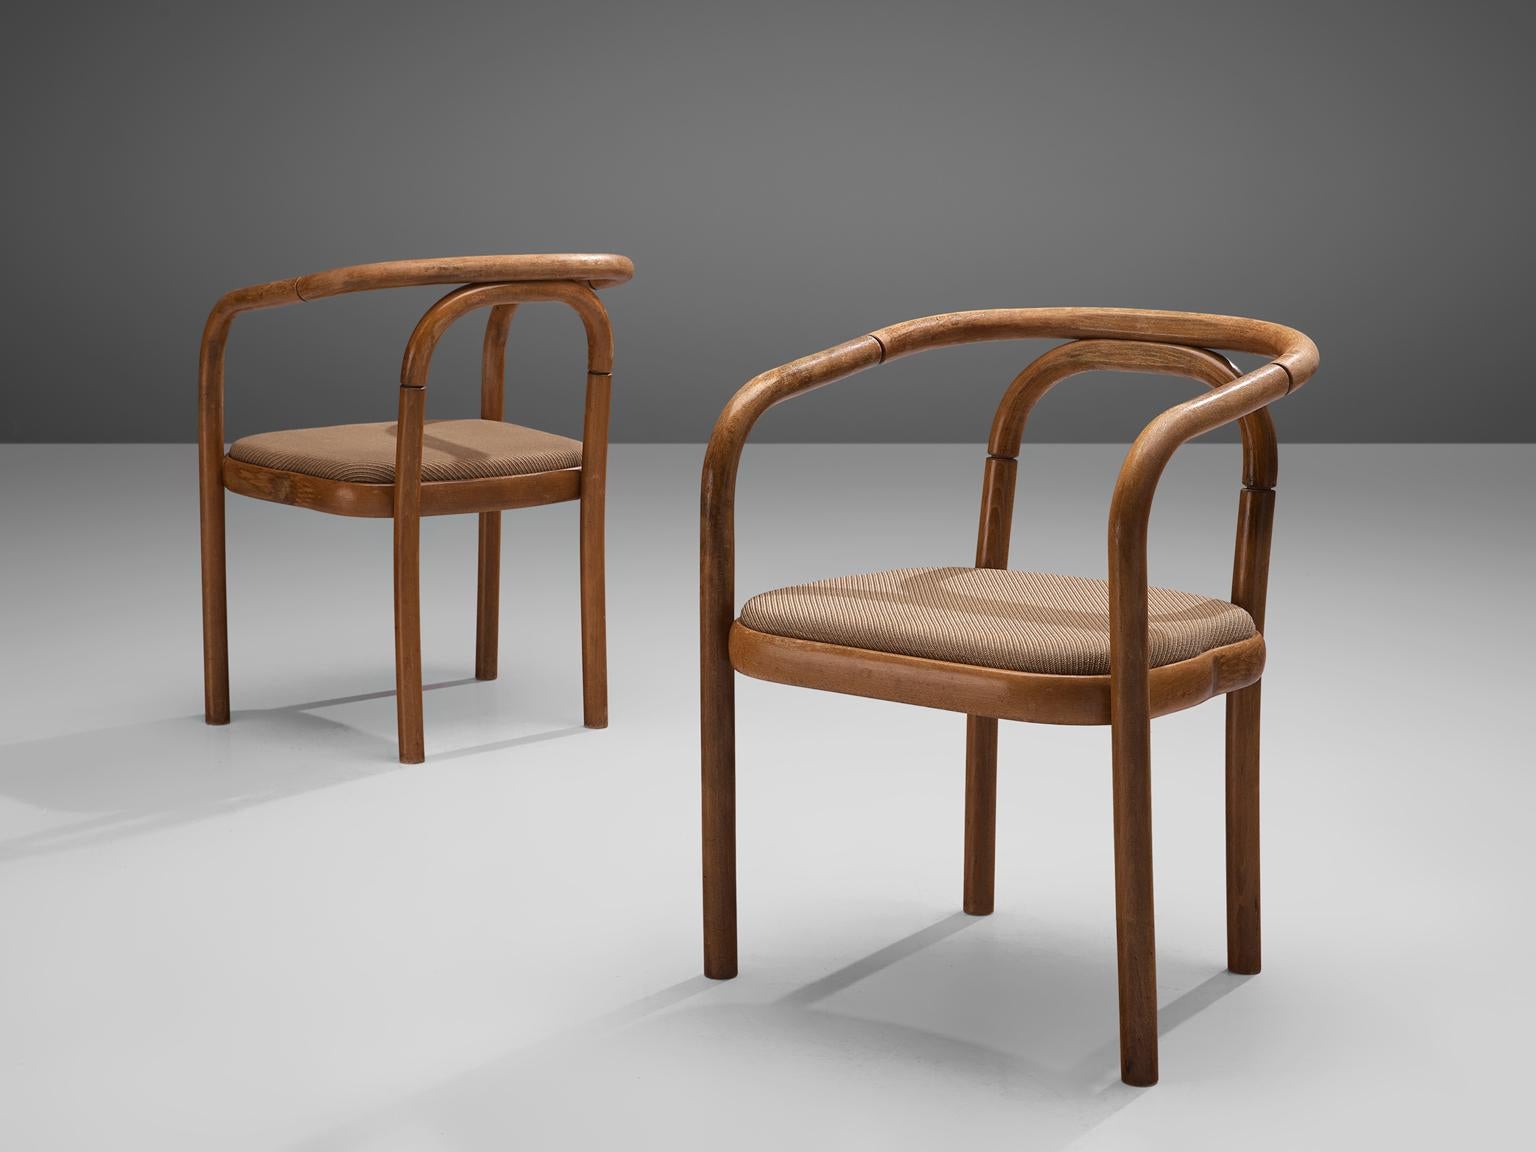 Lacquered Antonin Suman for TON Armchairs ‘E4309’ in Beech and Fabric Upholstery